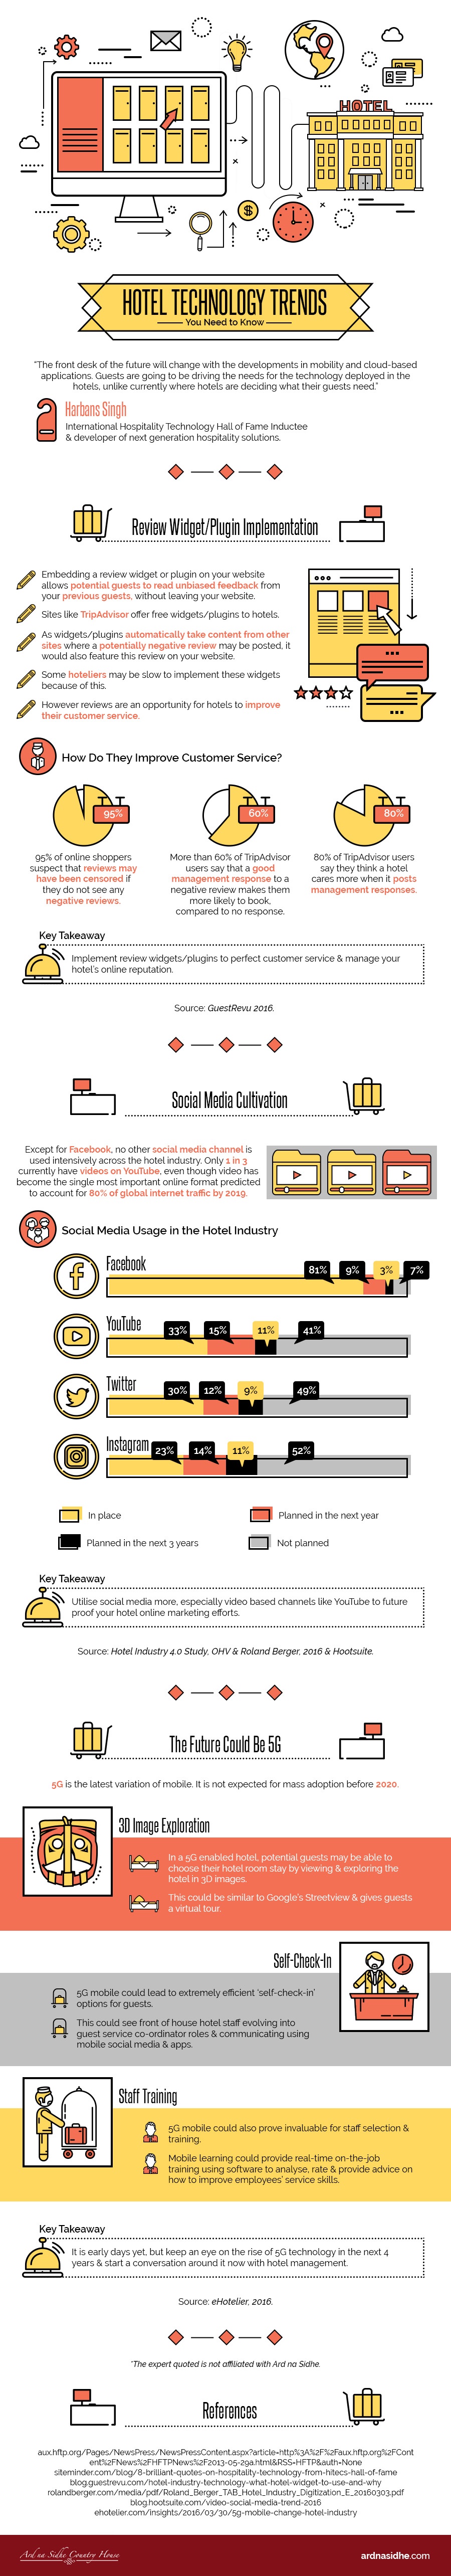 Hotel Technology Trends -Infographic